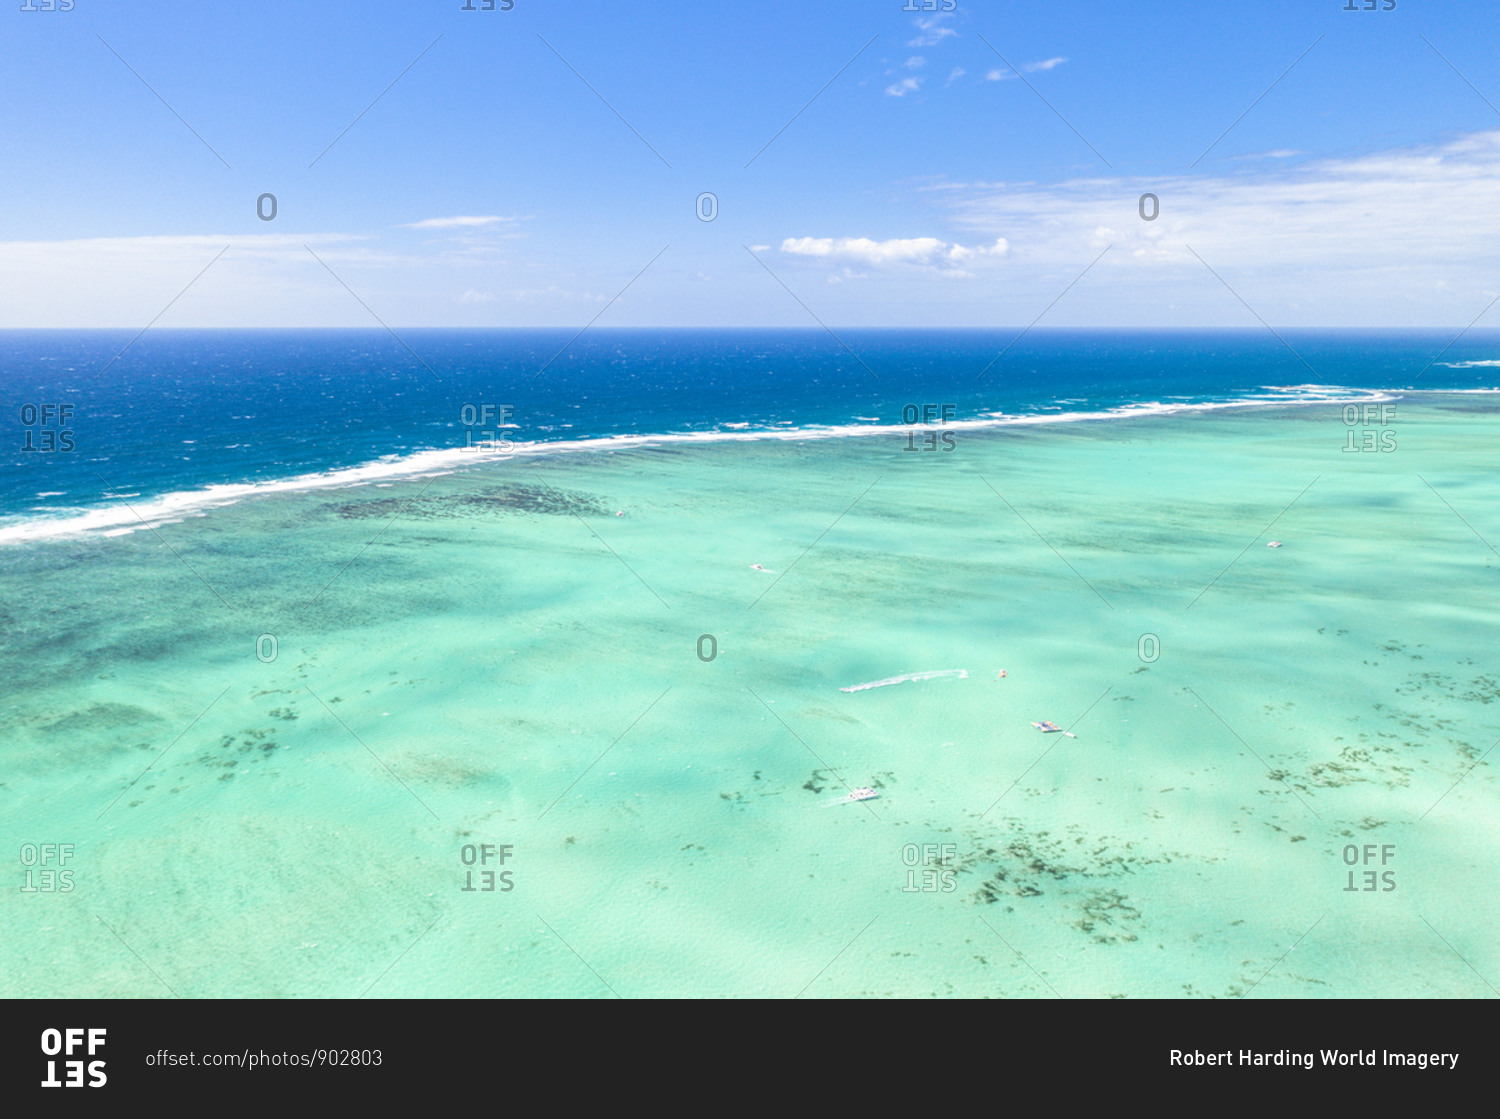 Turquoise coral reef meeting the blue Indian Ocean, aerial view by drone, Ile Aux Cerfs, Flacq district, Mauritius, Indian Ocean, Africa